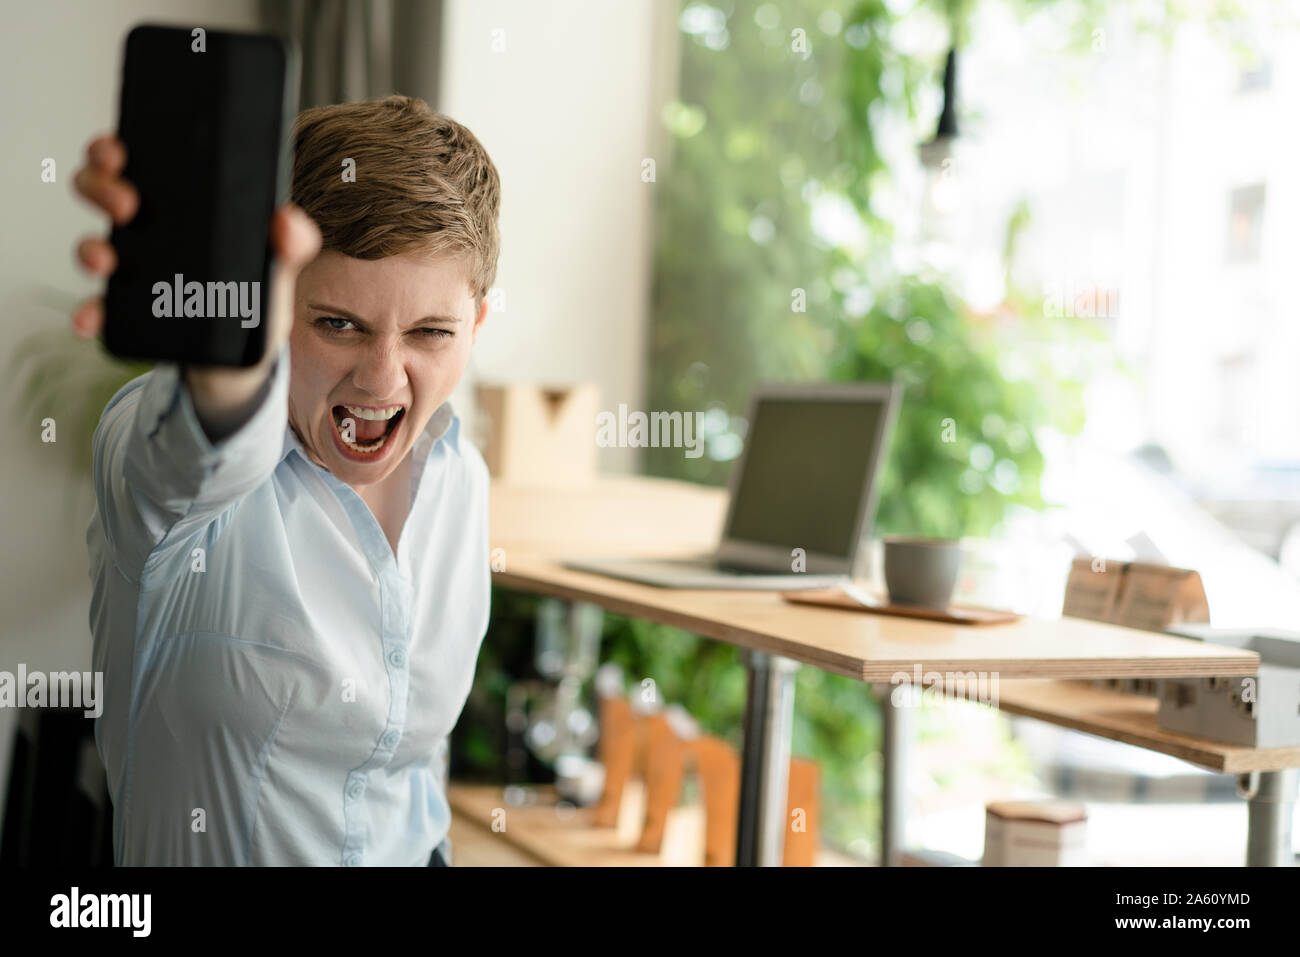 Portrait de screaming woman holding cell phone in a cafe Banque D'Images